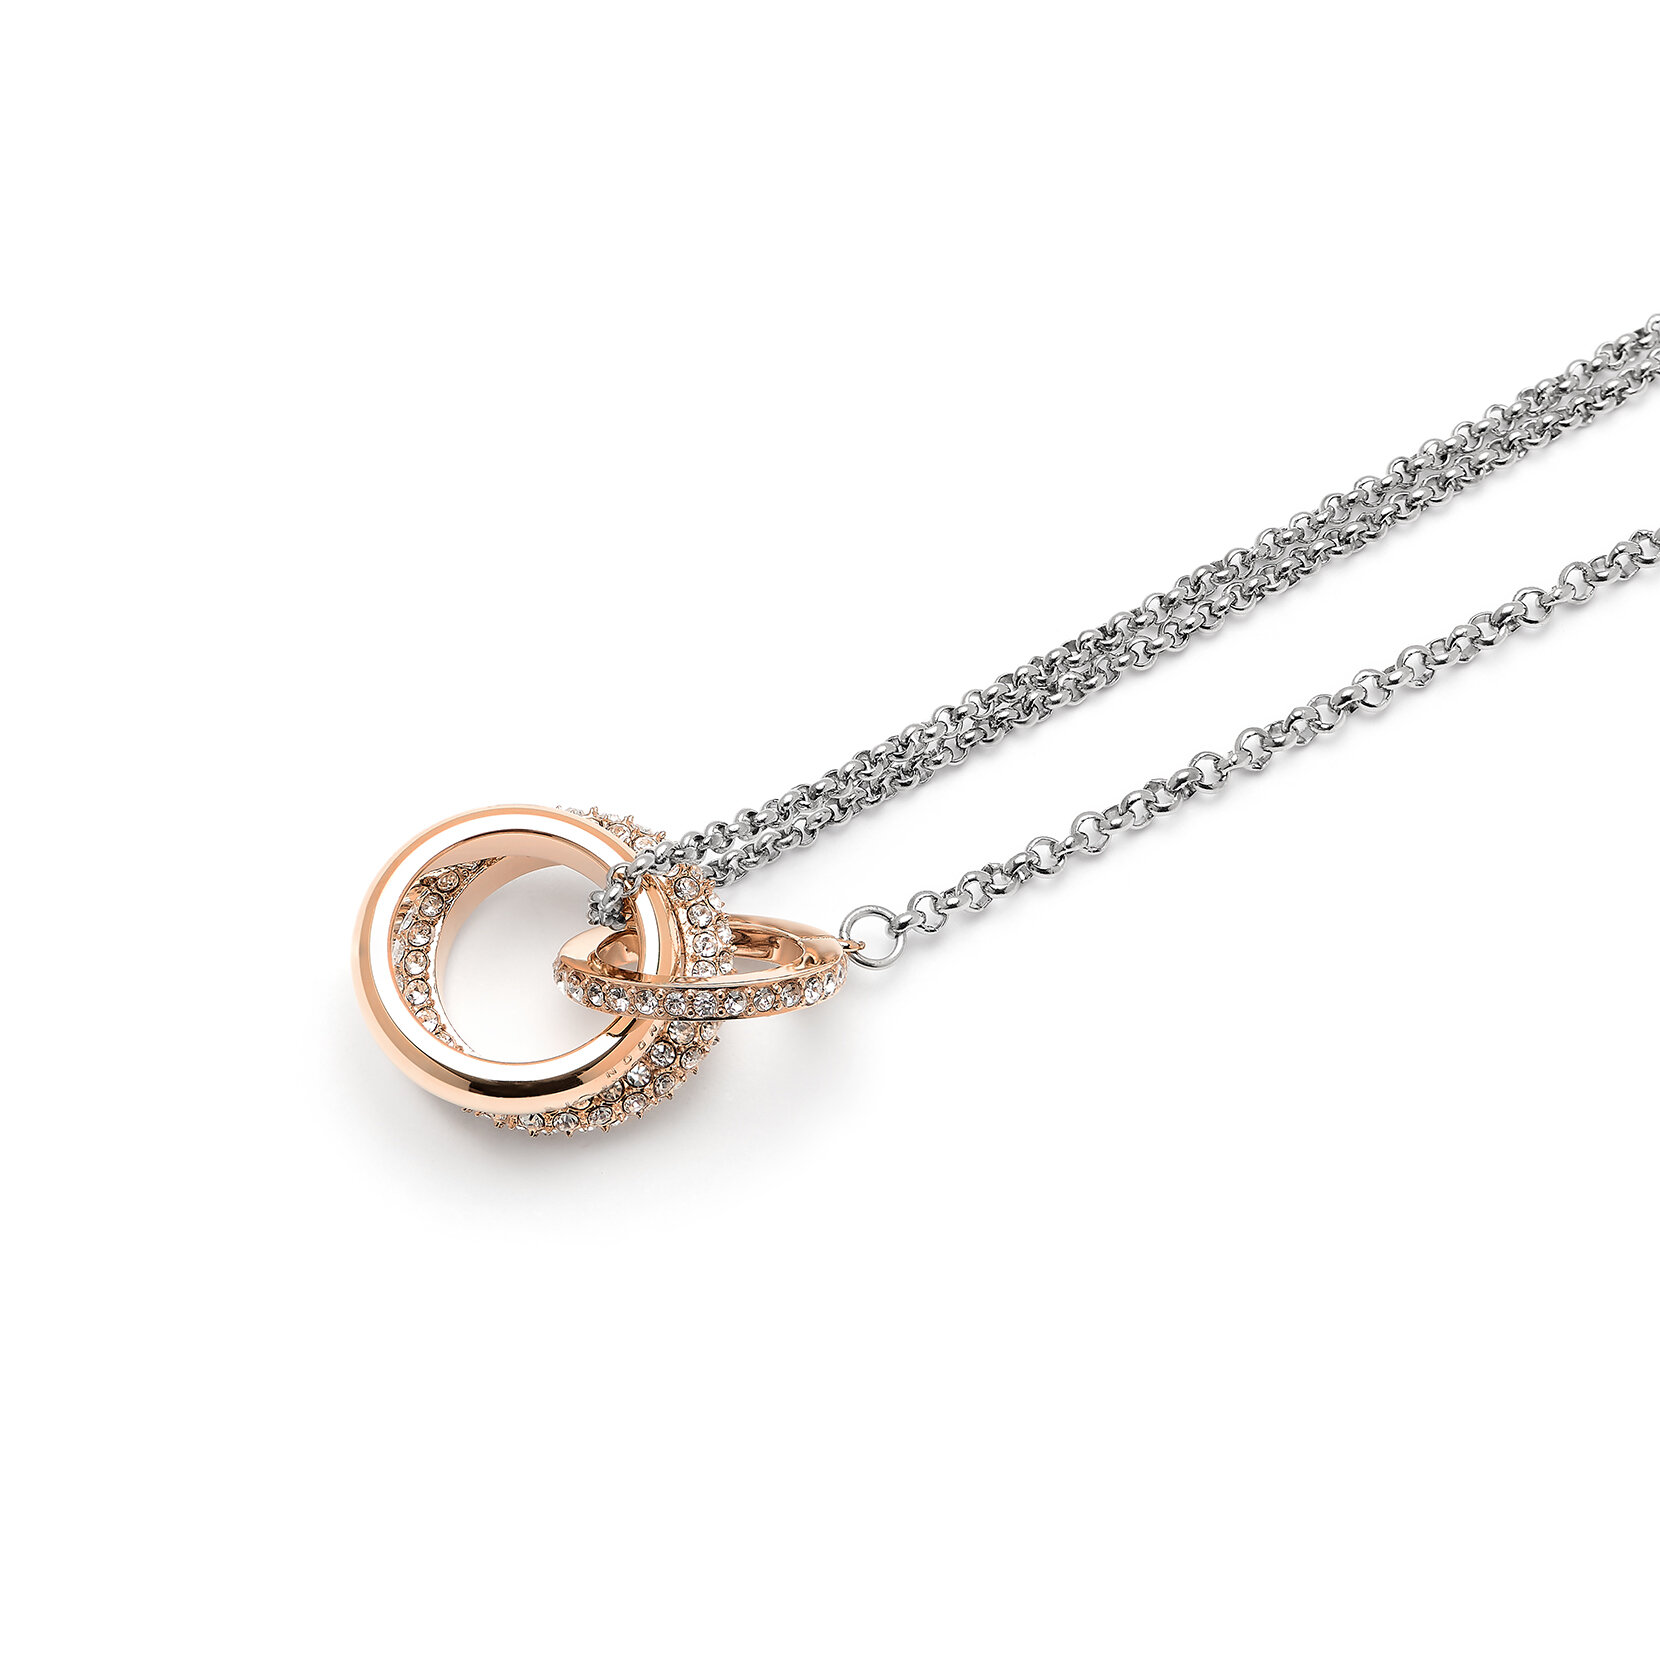 Entwine Silver & Rose Gold Necklace